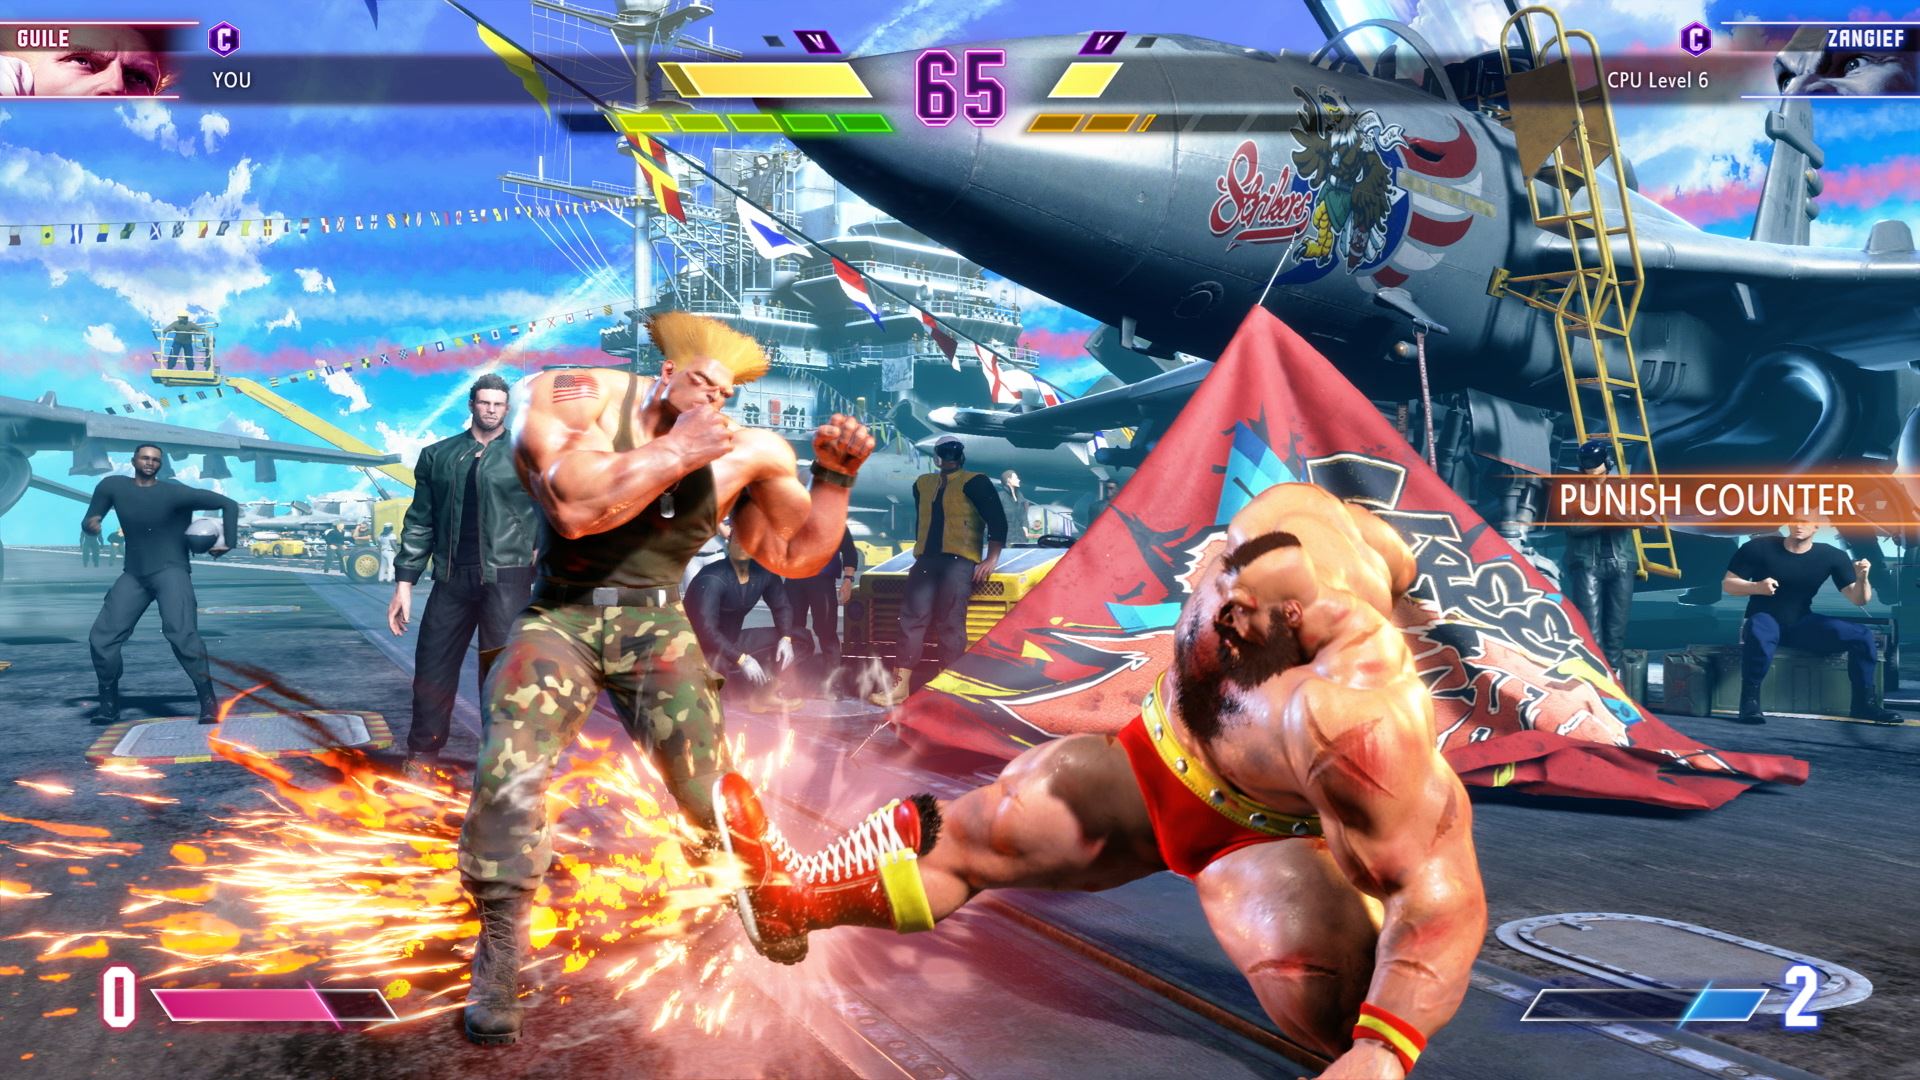 If ya wanna style on your opponent with 3 bars, here's a fun Guile